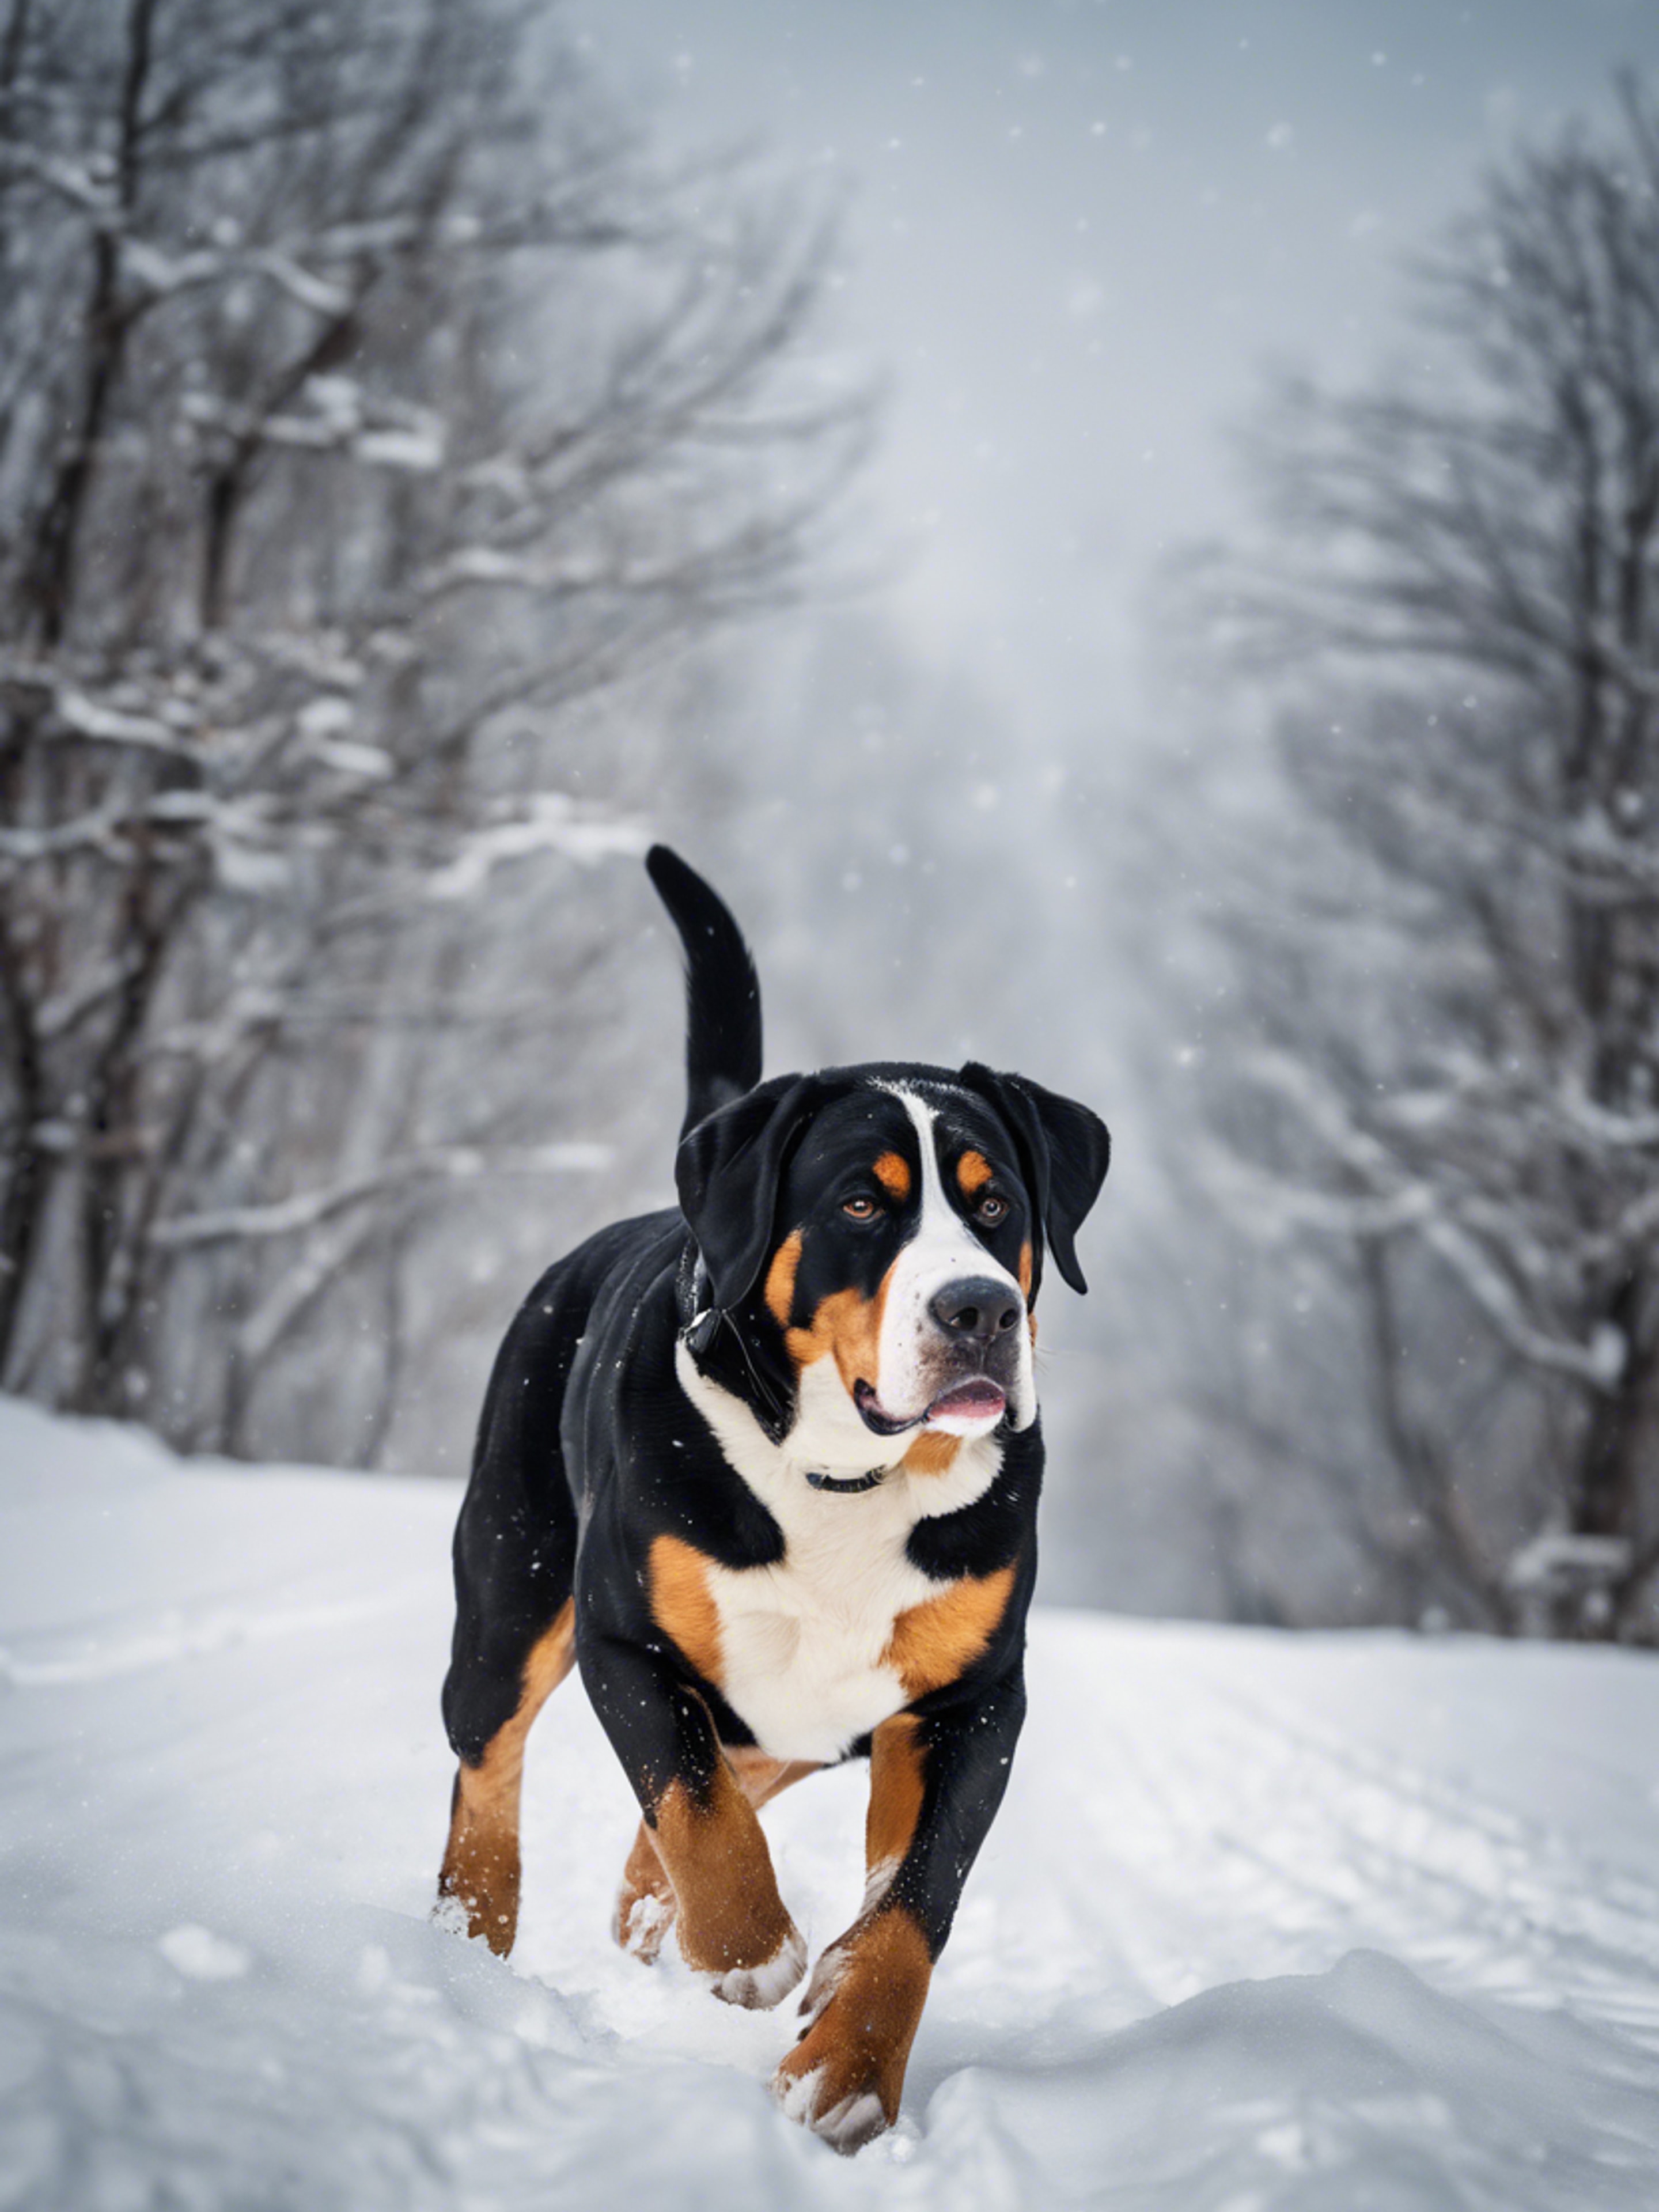 A Greater Swiss Mountain Dog exuding strength, plodding through the deep snow of a picturesque winter landscape.壁紙[21842a68eab04a6db418]